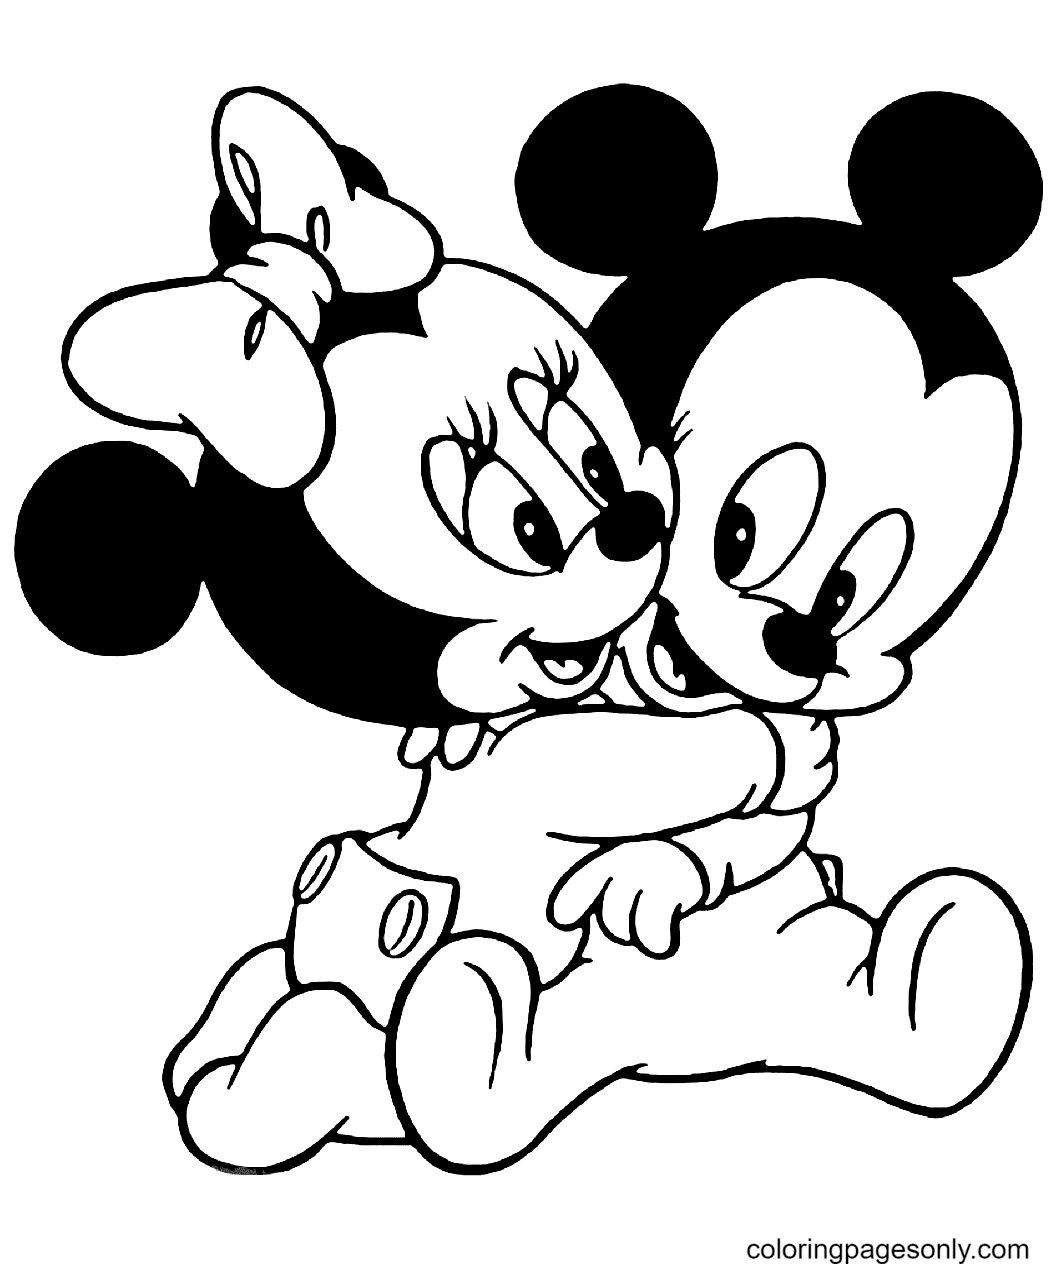 coloring-pages-of-mickey-and-minnie-mouse-find-the-best-mickey-mouse